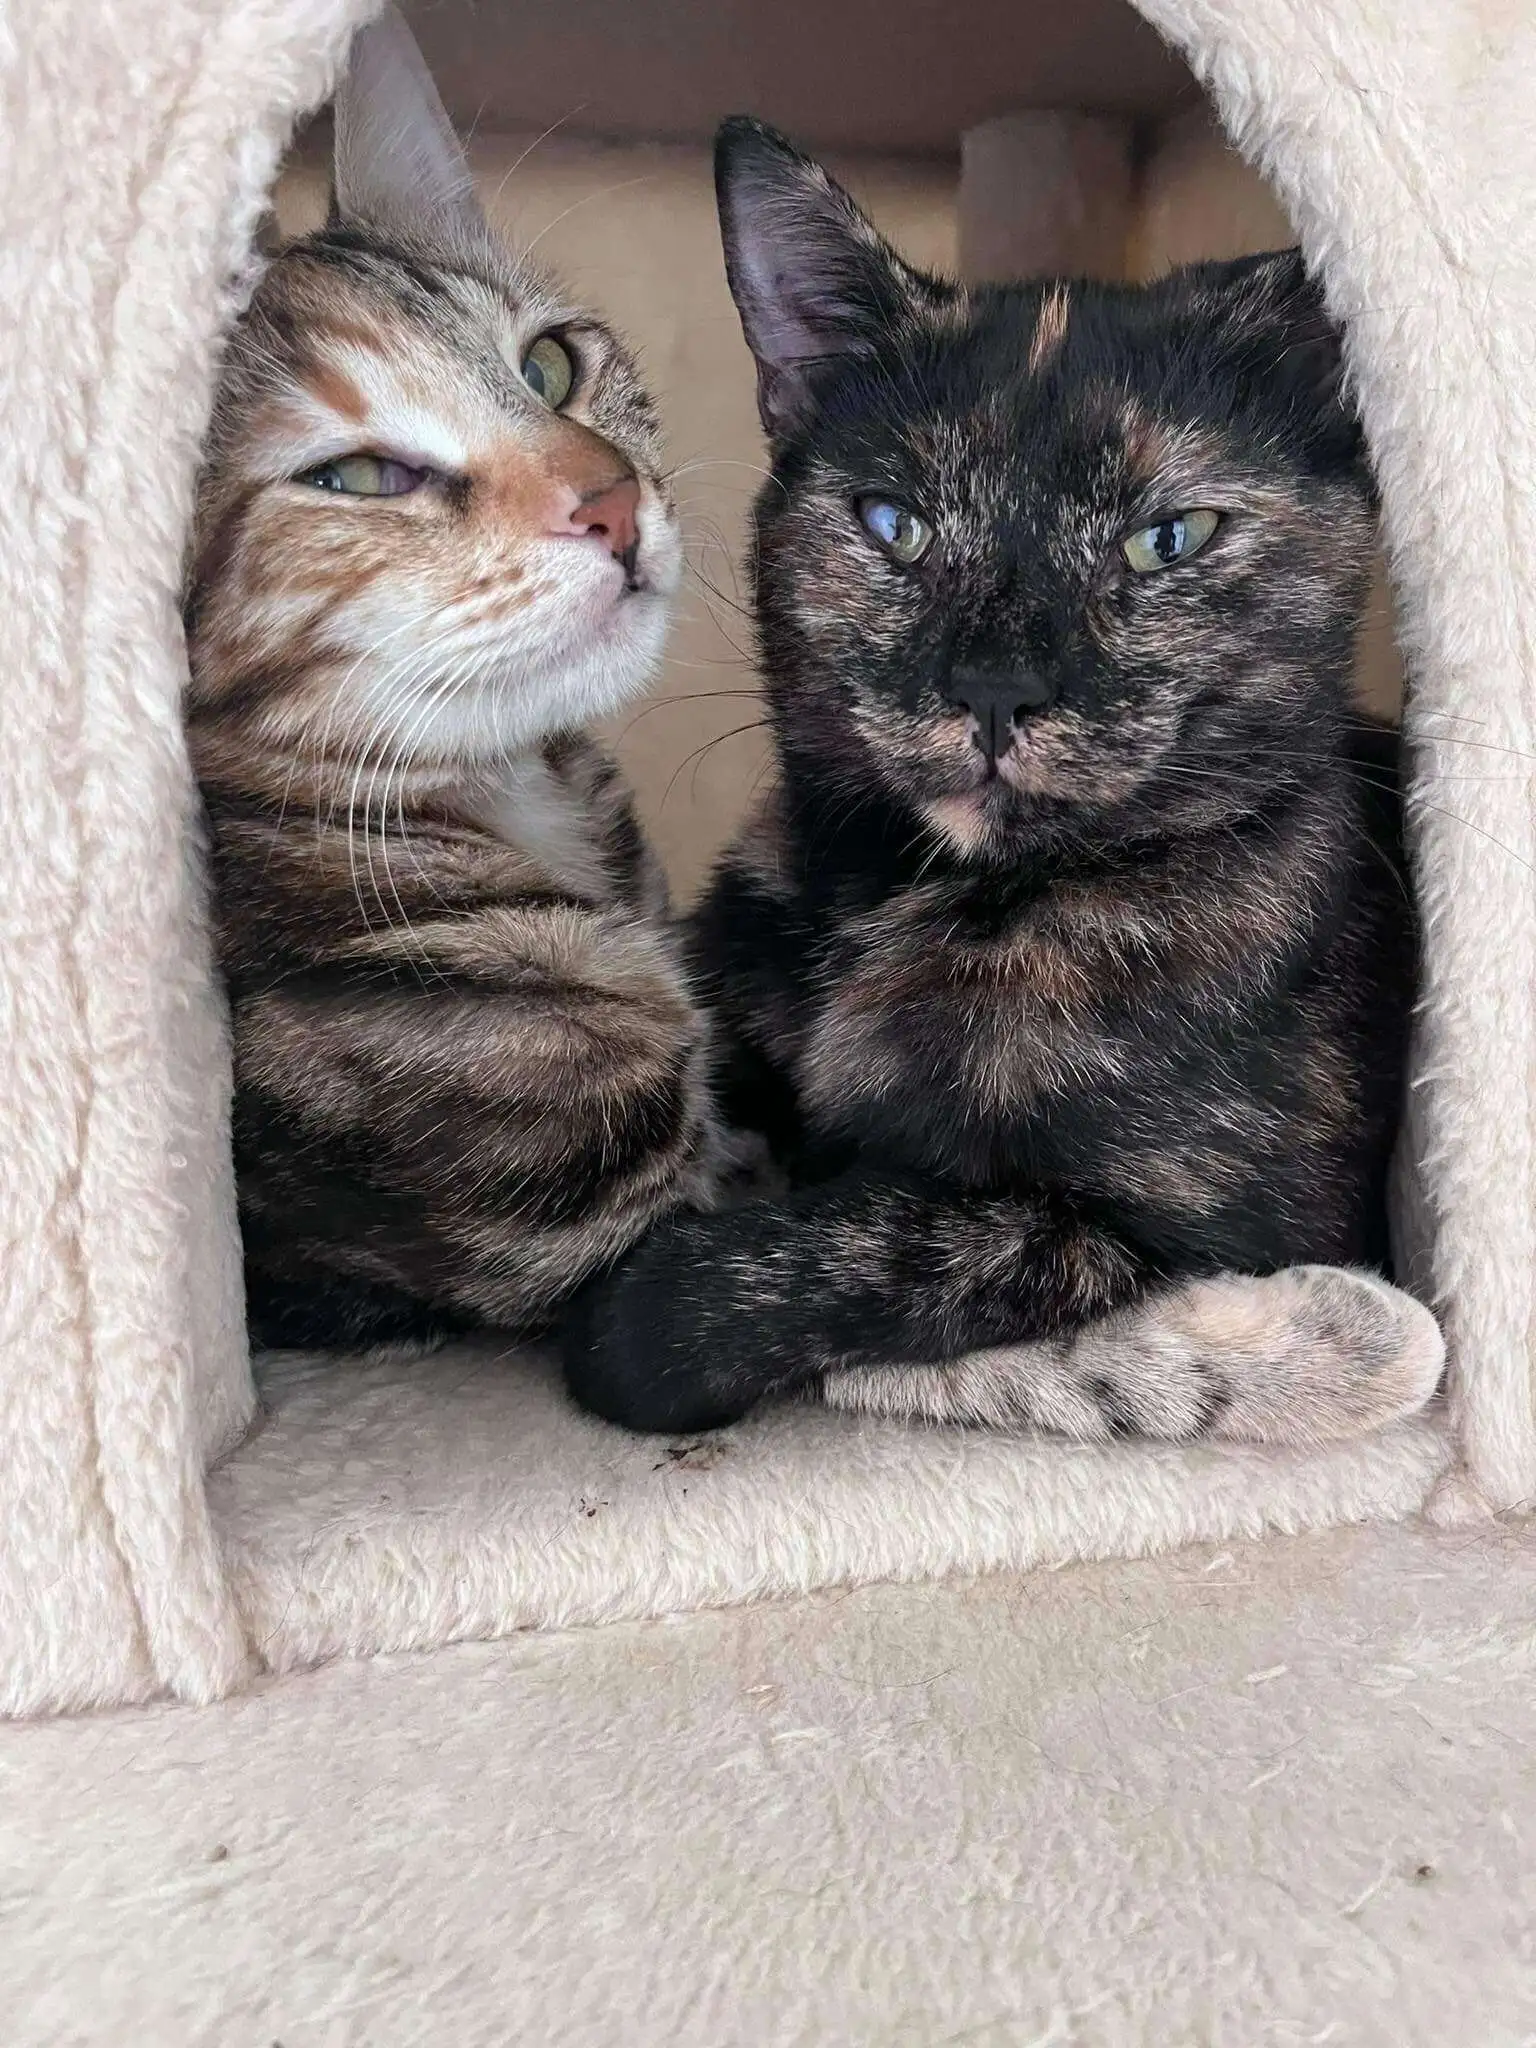 Two cats in the care of the MSPCA, Malta